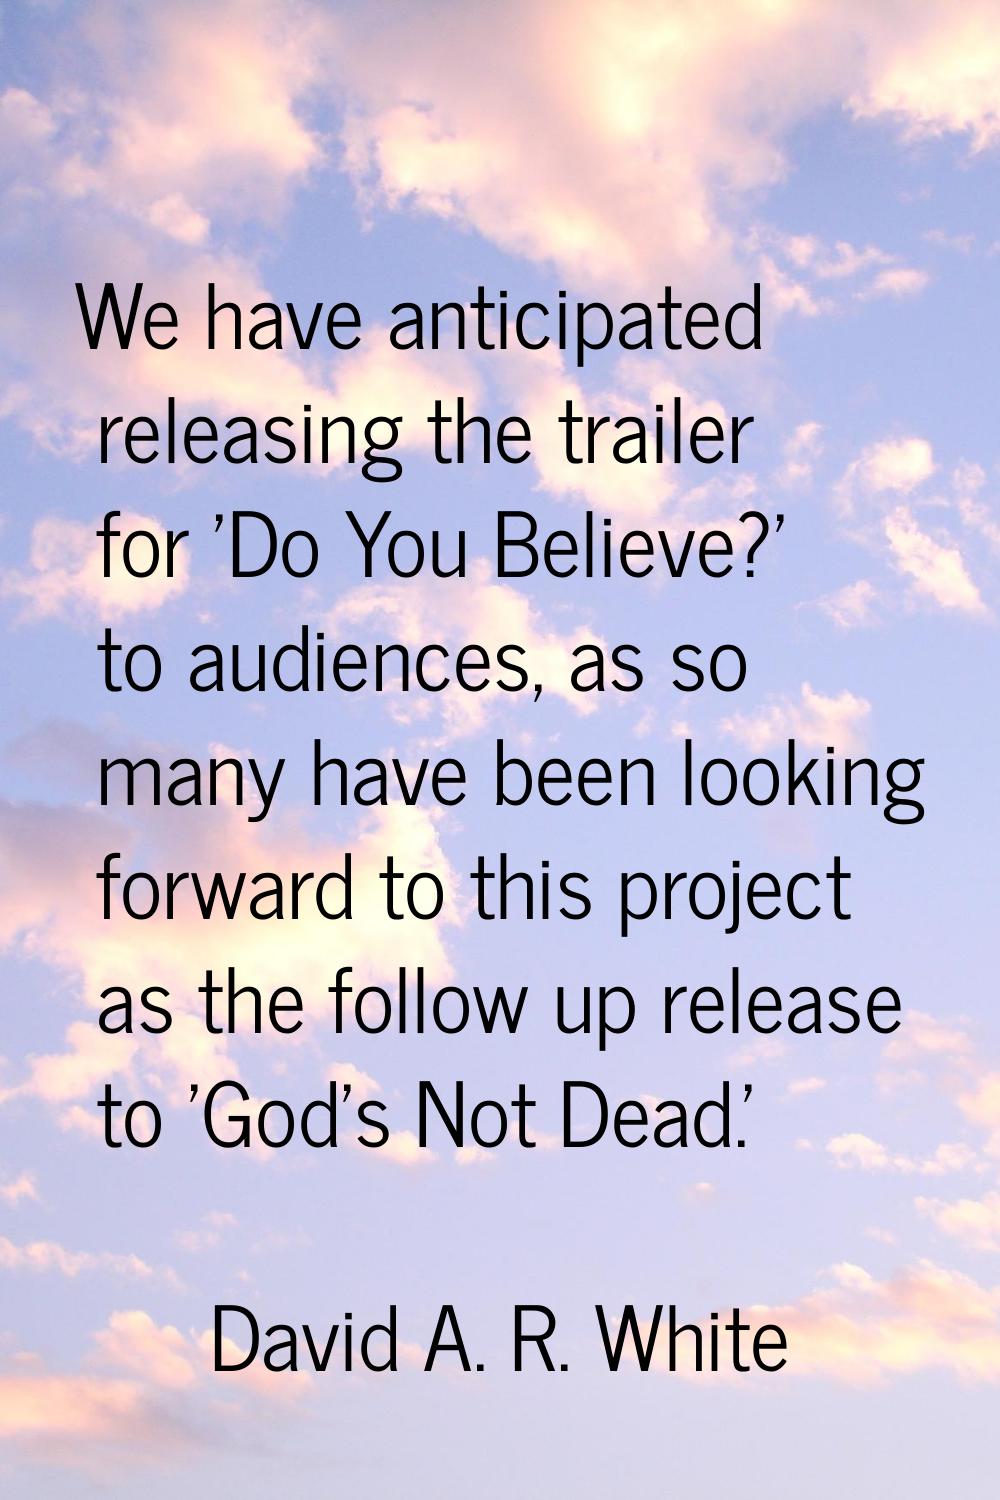 We have anticipated releasing the trailer for 'Do You Believe?' to audiences, as so many have been 